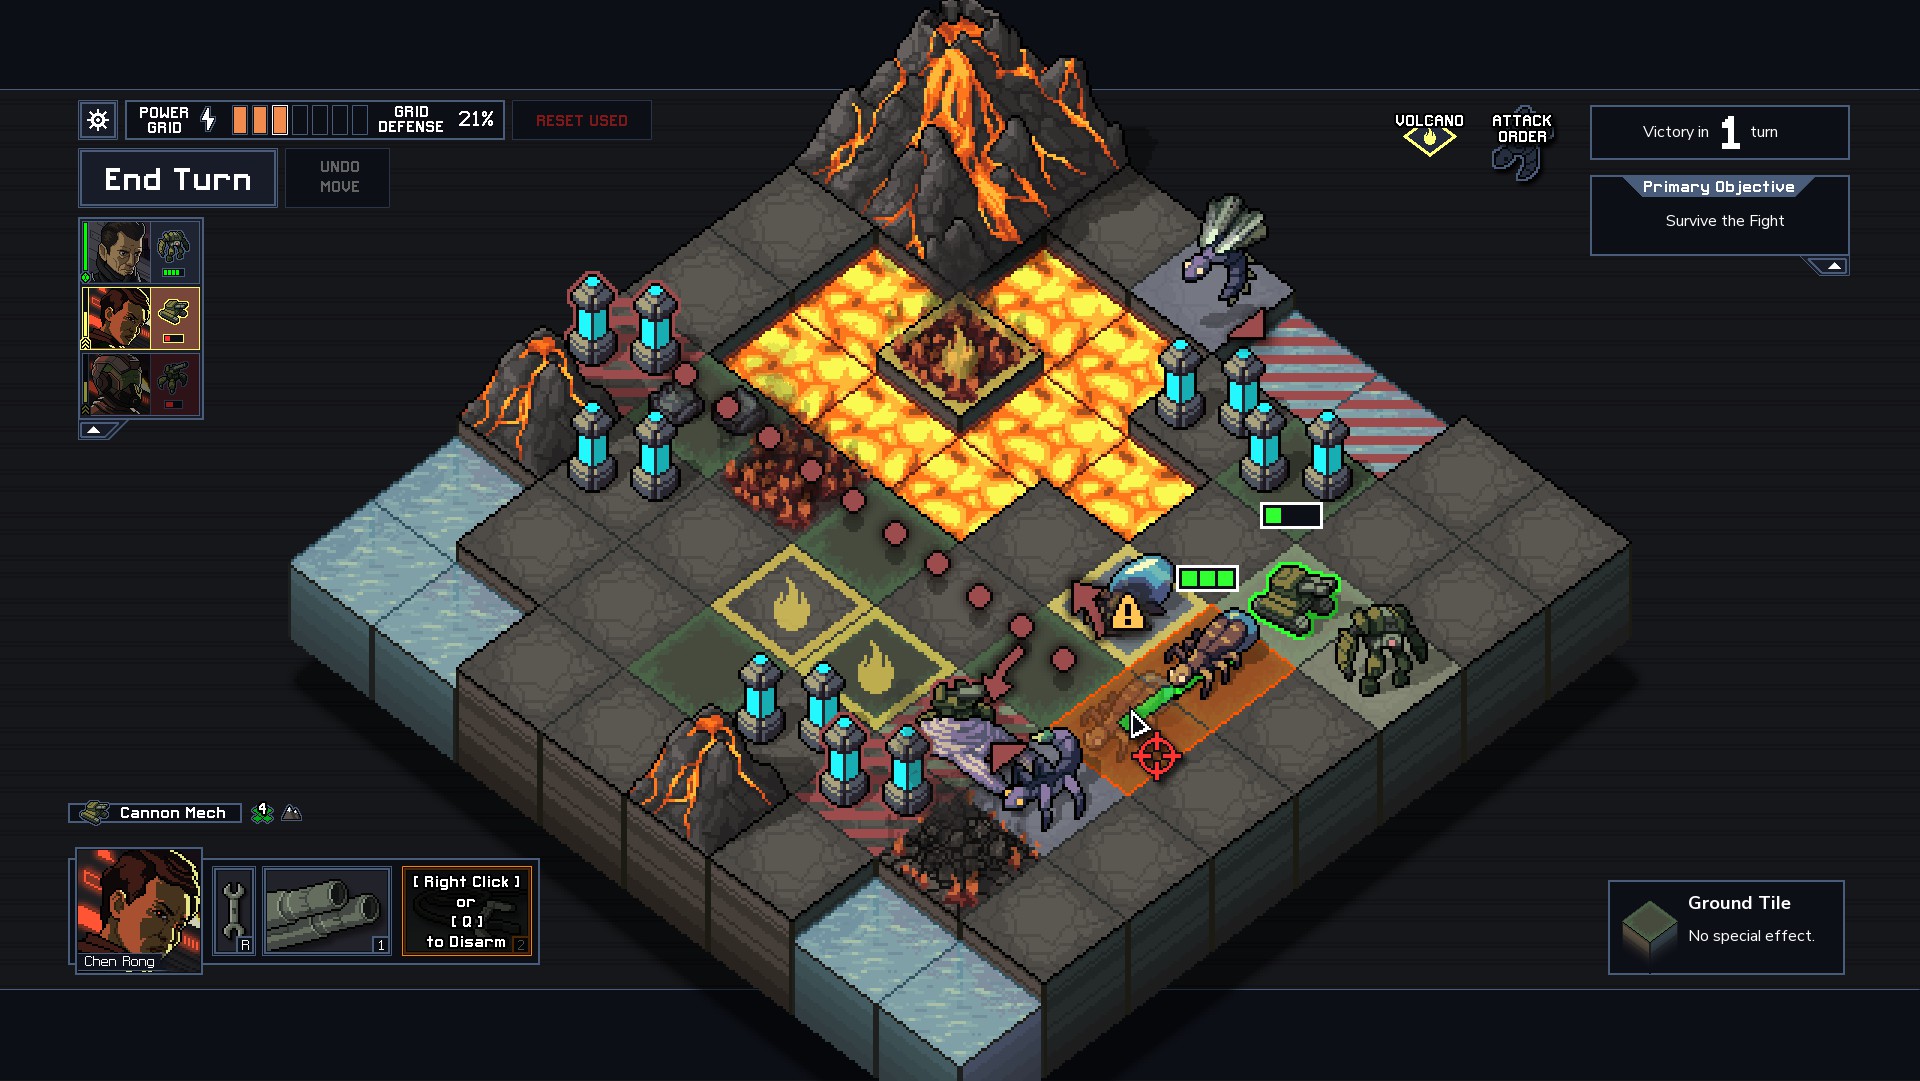 download the new for android Into the Breach